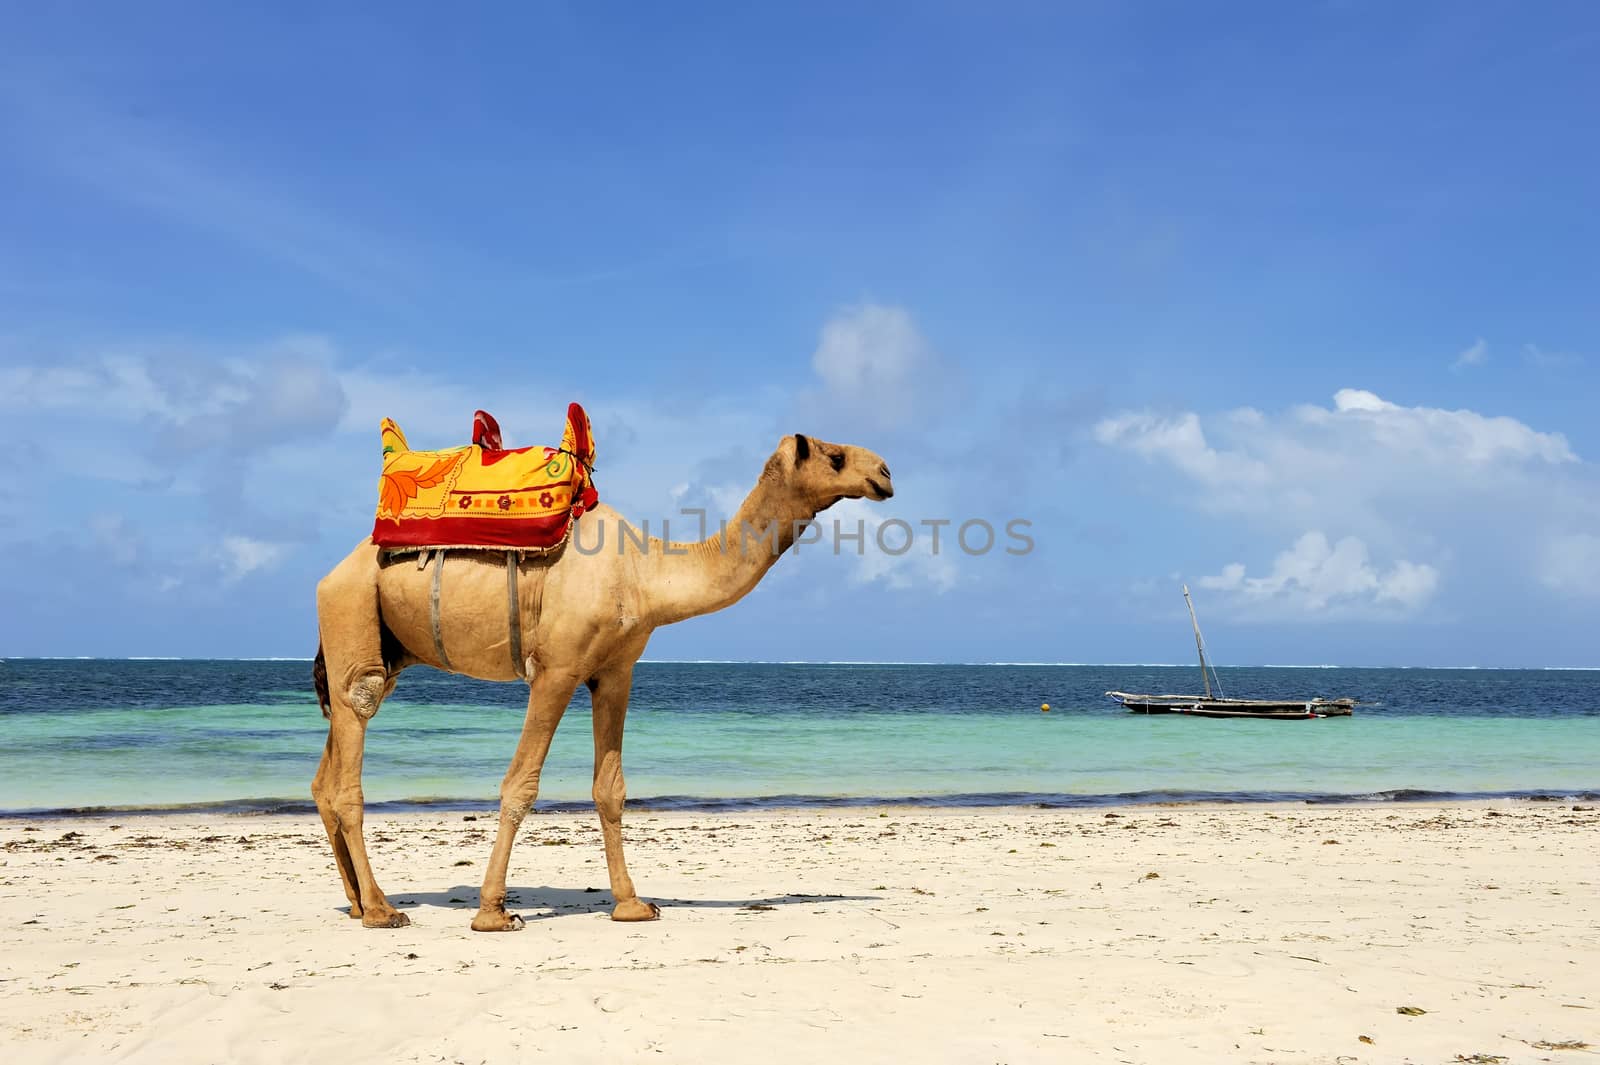 Camel standing at ocean beach coast with blue sky